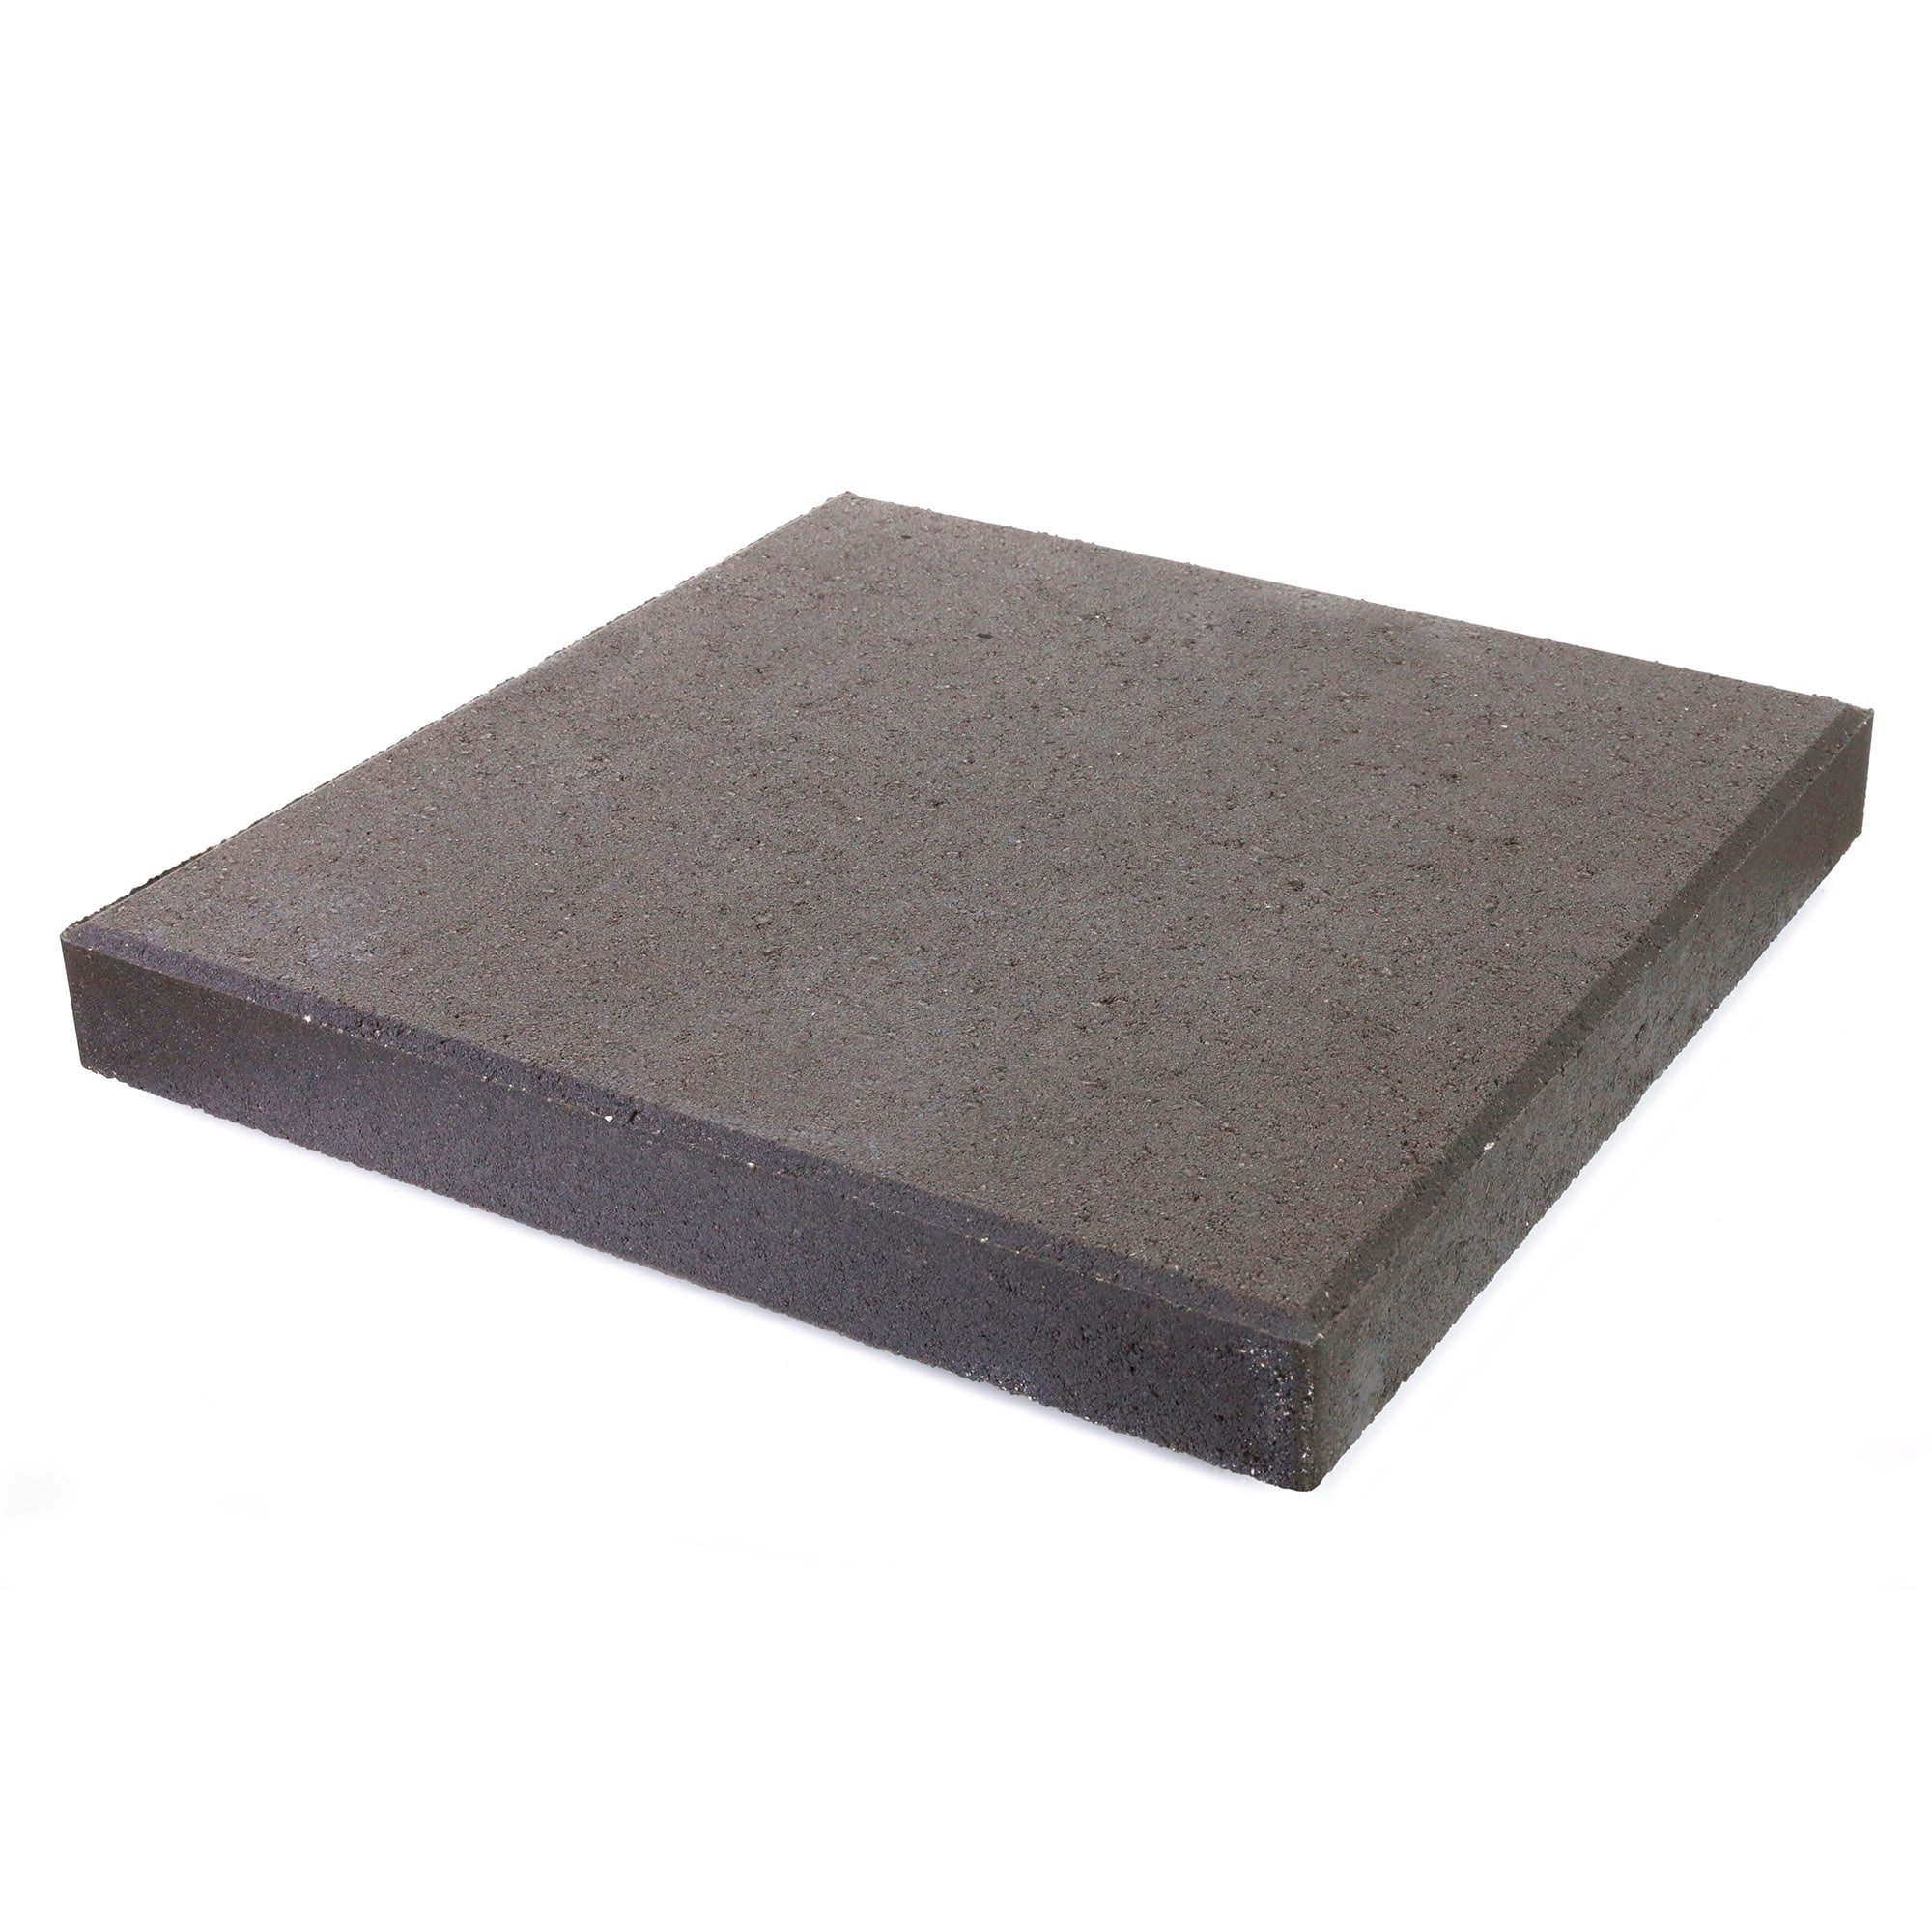 Pavestone 16x16 square 16-in L x 16-in x 2-in H Patio Stone in the Pavers & Stepping department at Lowes.com